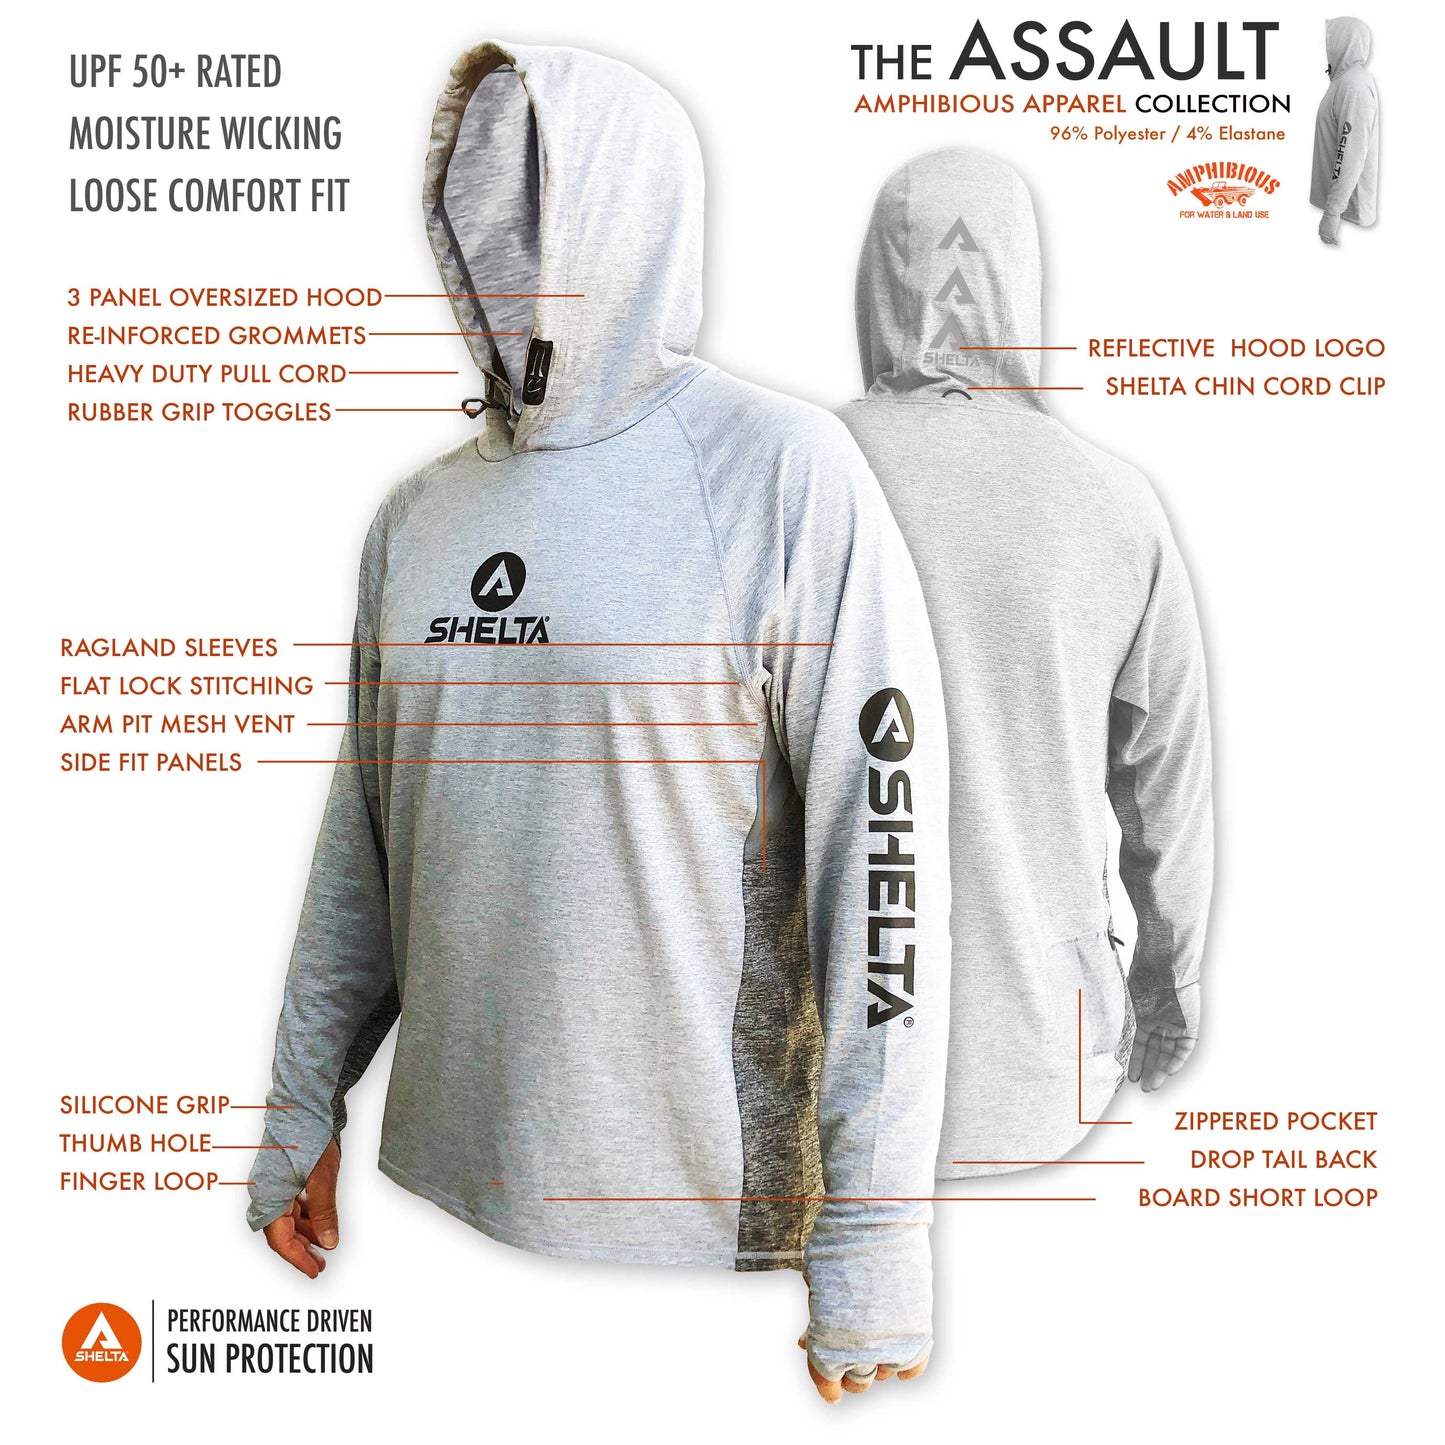 The Assault Hoodie is engineered & built with sun protection, function, and durability in mind.  Offering features consistent with Shelta core values and innovation goals.   UPF 50+ UV protection, the highest rating given.  Blocks 98% of UVA/UVB radiation Loose comfort fit Moisture Wicking Sleeves with thumb hole & finger loop for multiple hand protection options